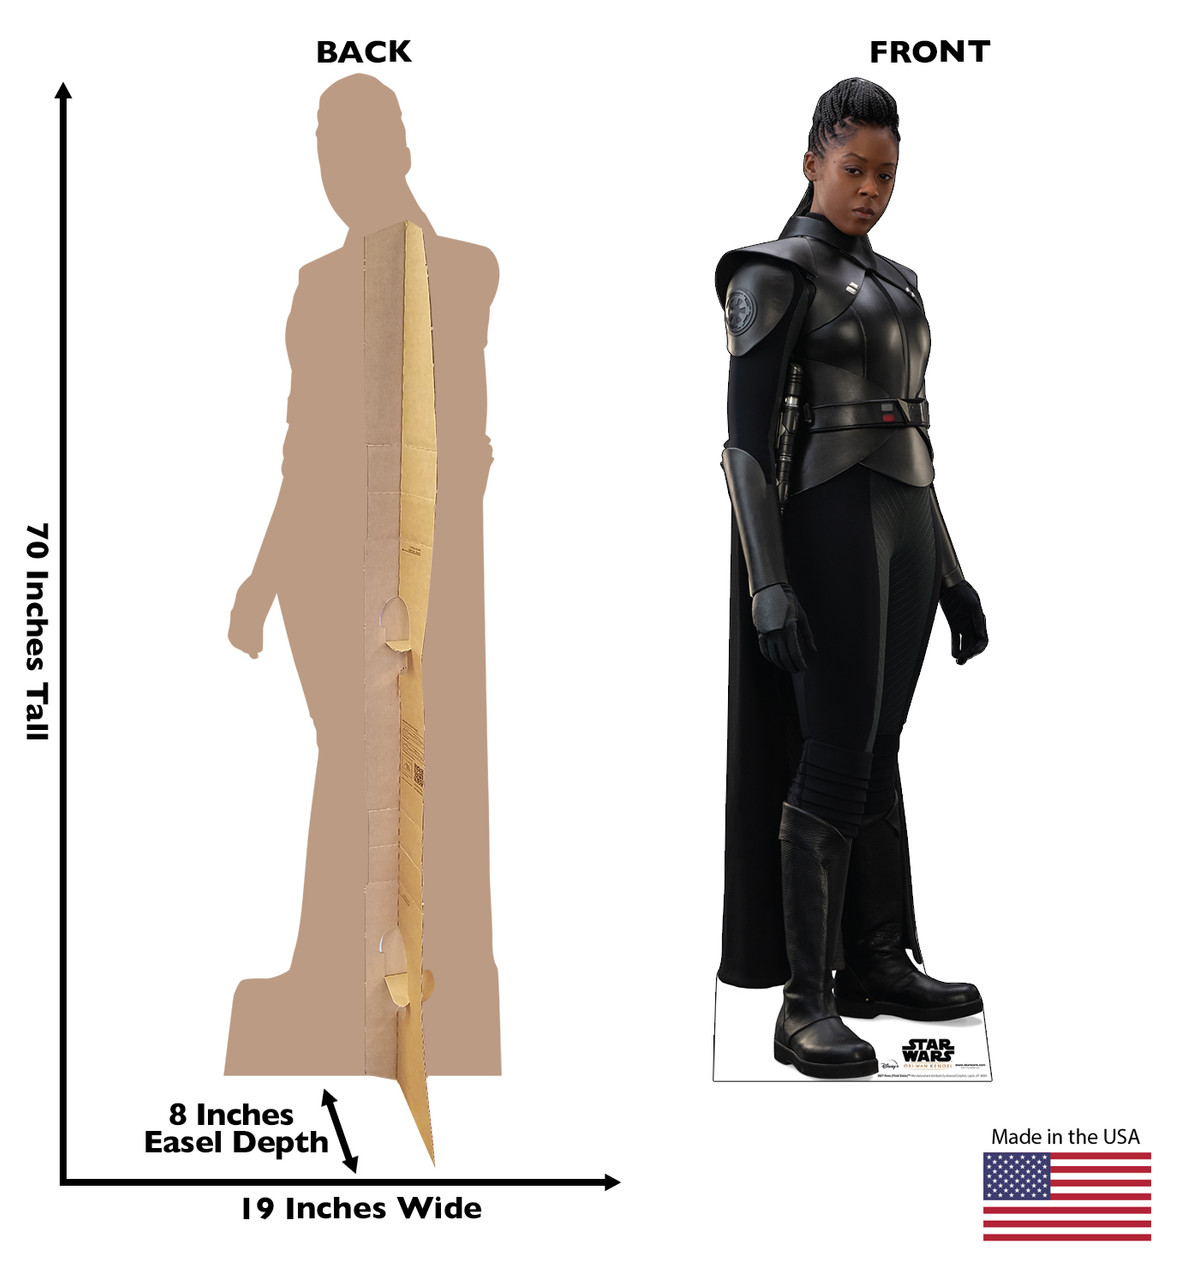 Life-size cardboard standee of Reva Third Sister from Star Wars Obi-Wan Kenobi Series on Disney Plus with back and front dimensions.